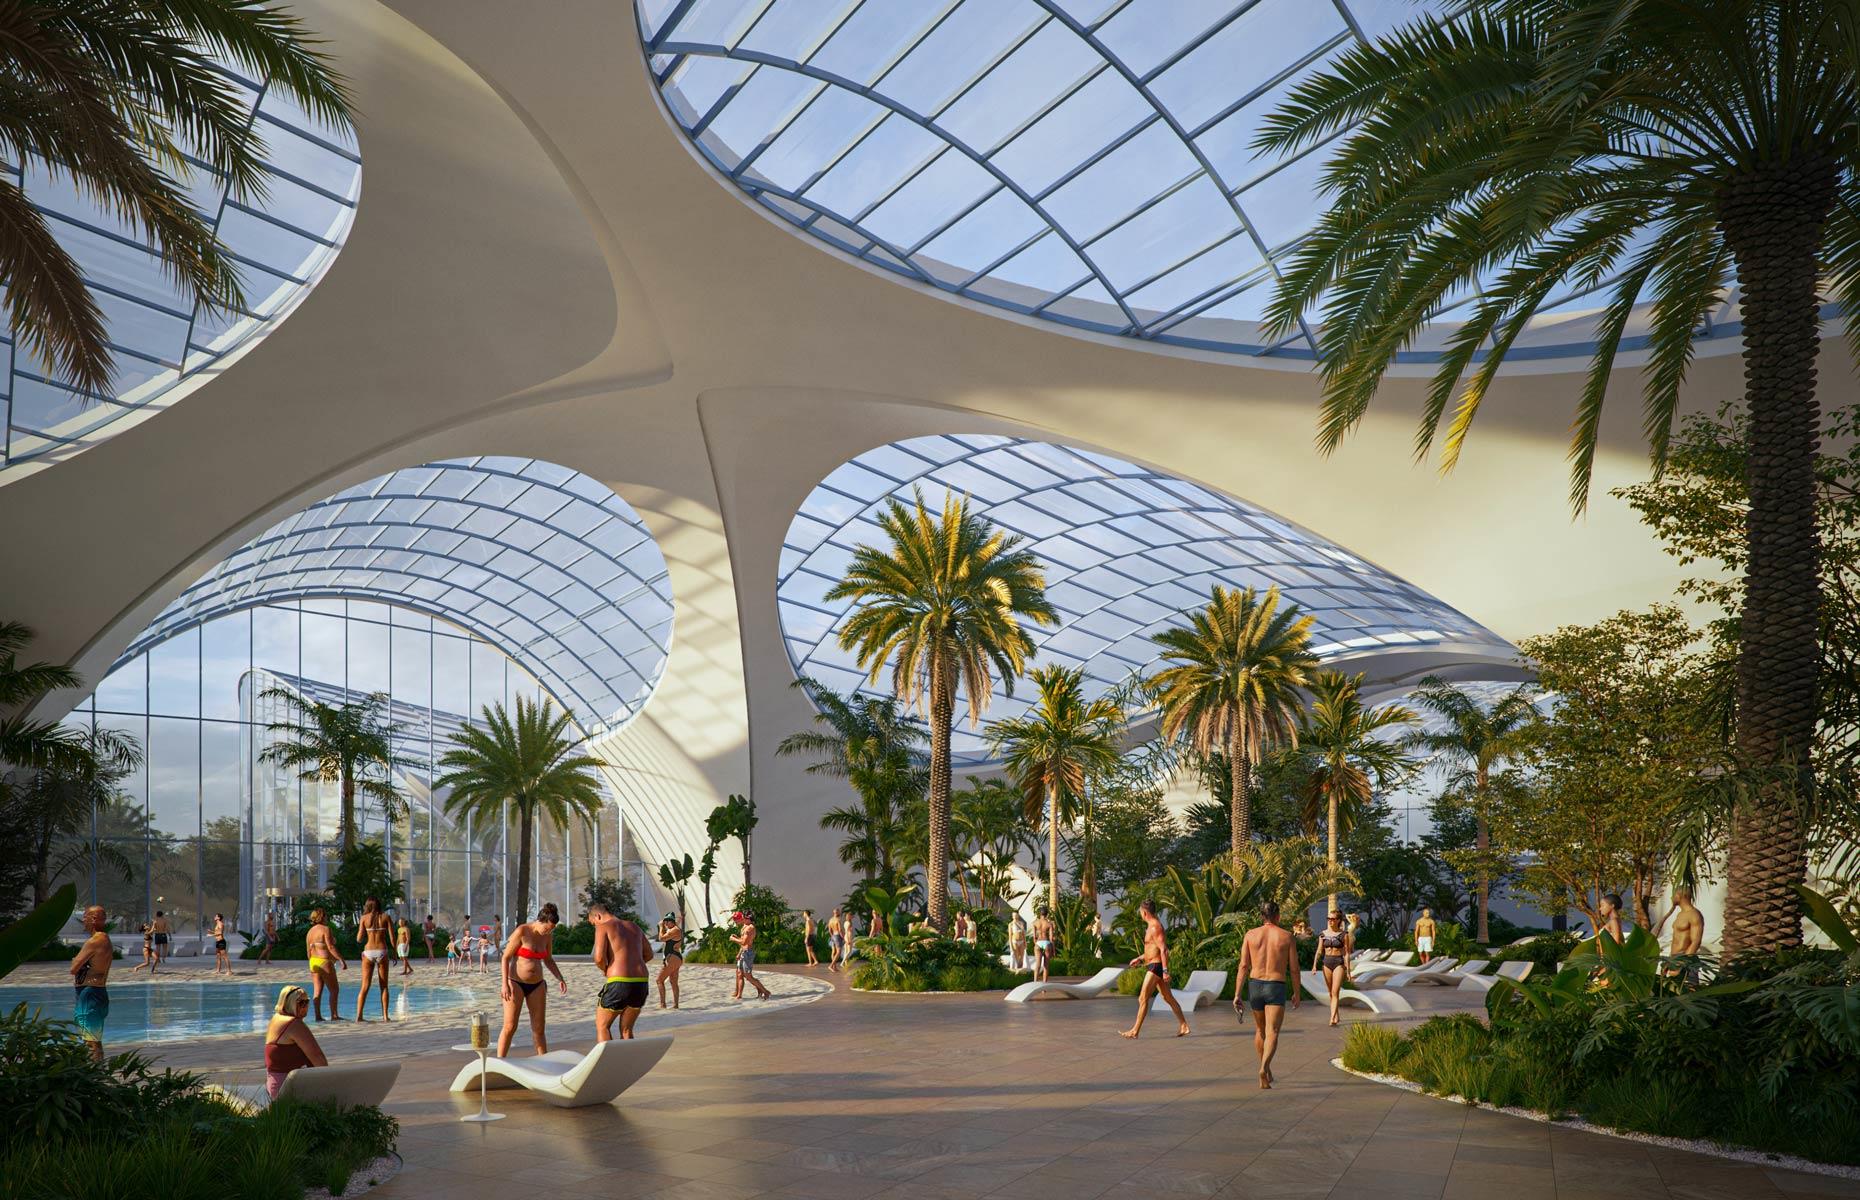 <p>Scheduled to open in 2025 and building on the success of Therme Group offerings including Therme Bucharest in Romania, this £250 million ($313m) waterpark is set to be more than impressive. It will feature thermal pools, spa facilities and a 'biodiverse garden' for the grown-ups, indoor and outdoor pools for kids both big and small, and a large family zone with water slides and a wave pool. Onsite restaurants and cafes will mean visitors can happily spend the whole day here too after refuelling. </p>  <p><strong>Liked this? Click on the Follow button above for more great stories from loveEXPLORING</strong></p>  <p><a href="http://www.loveexploring.com/galleries/82982/the-worlds-most-spectacular-water-displays?page=1"><strong>Now discover the world's most spectacular water displays</strong></a></p>